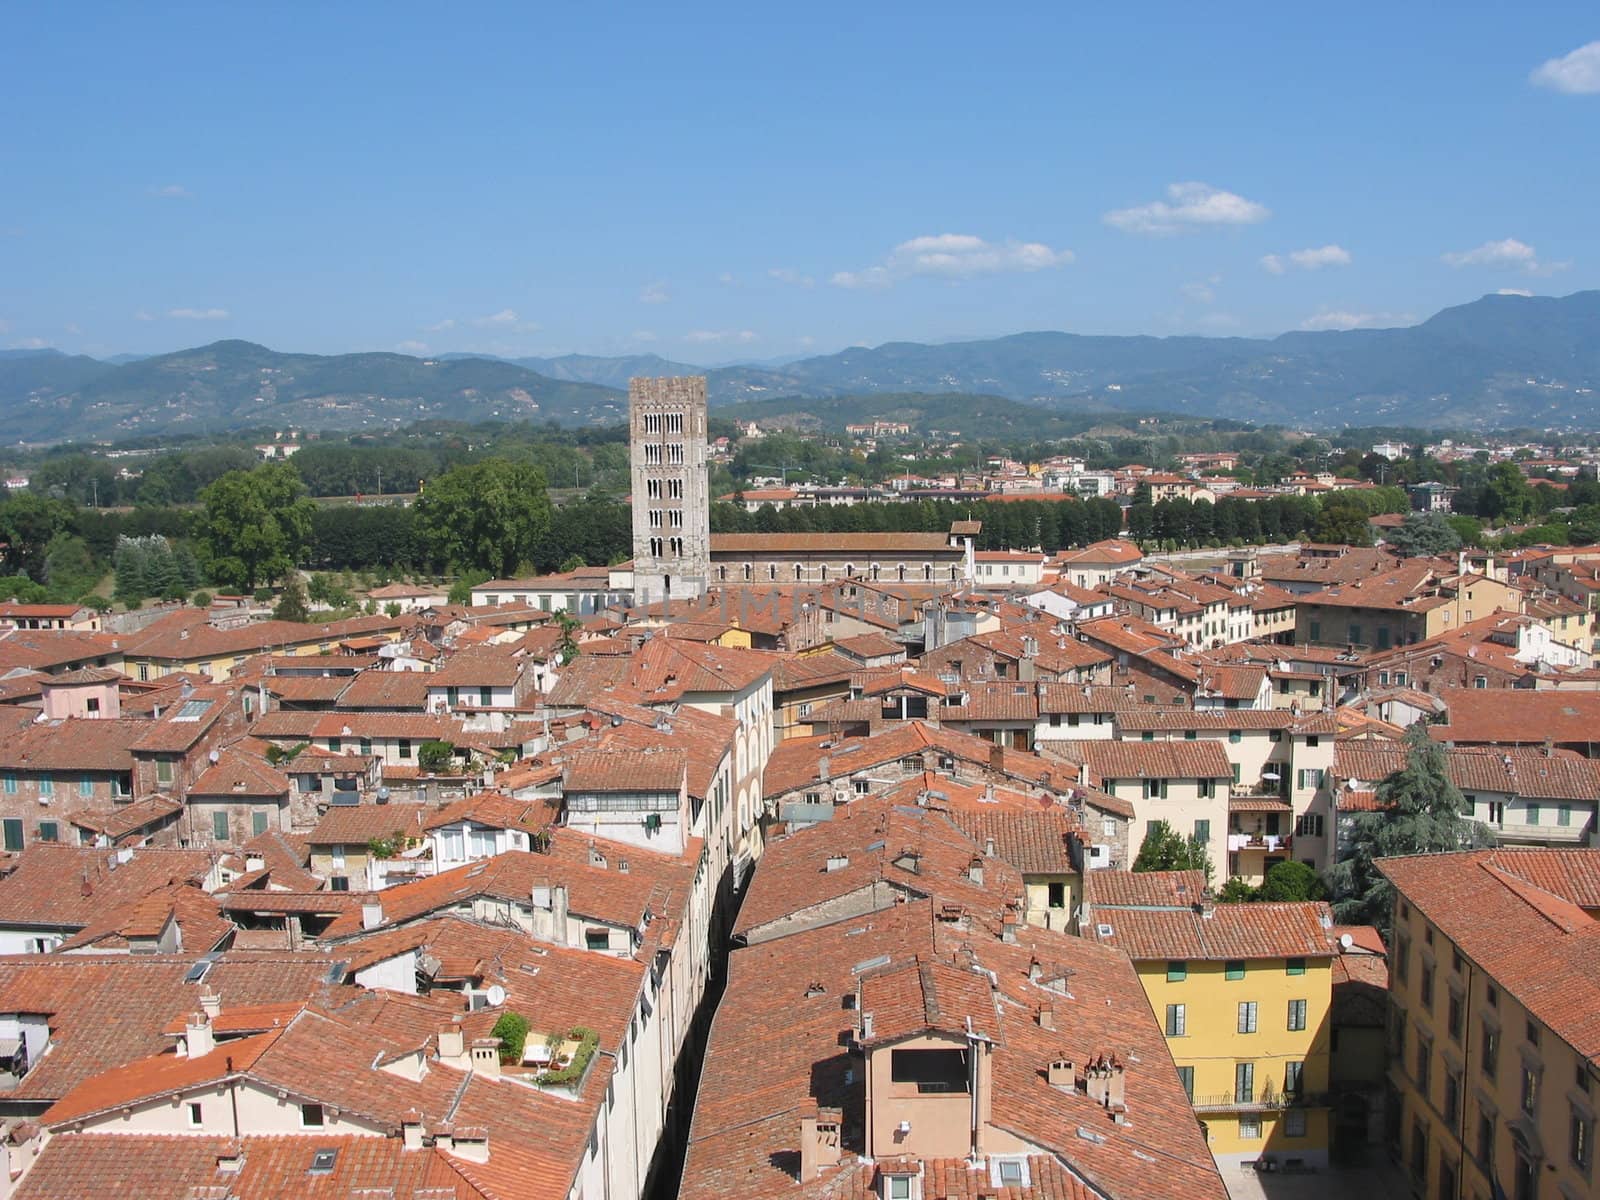 Lucca is a historycal town in Tuscany surrounded by city walls